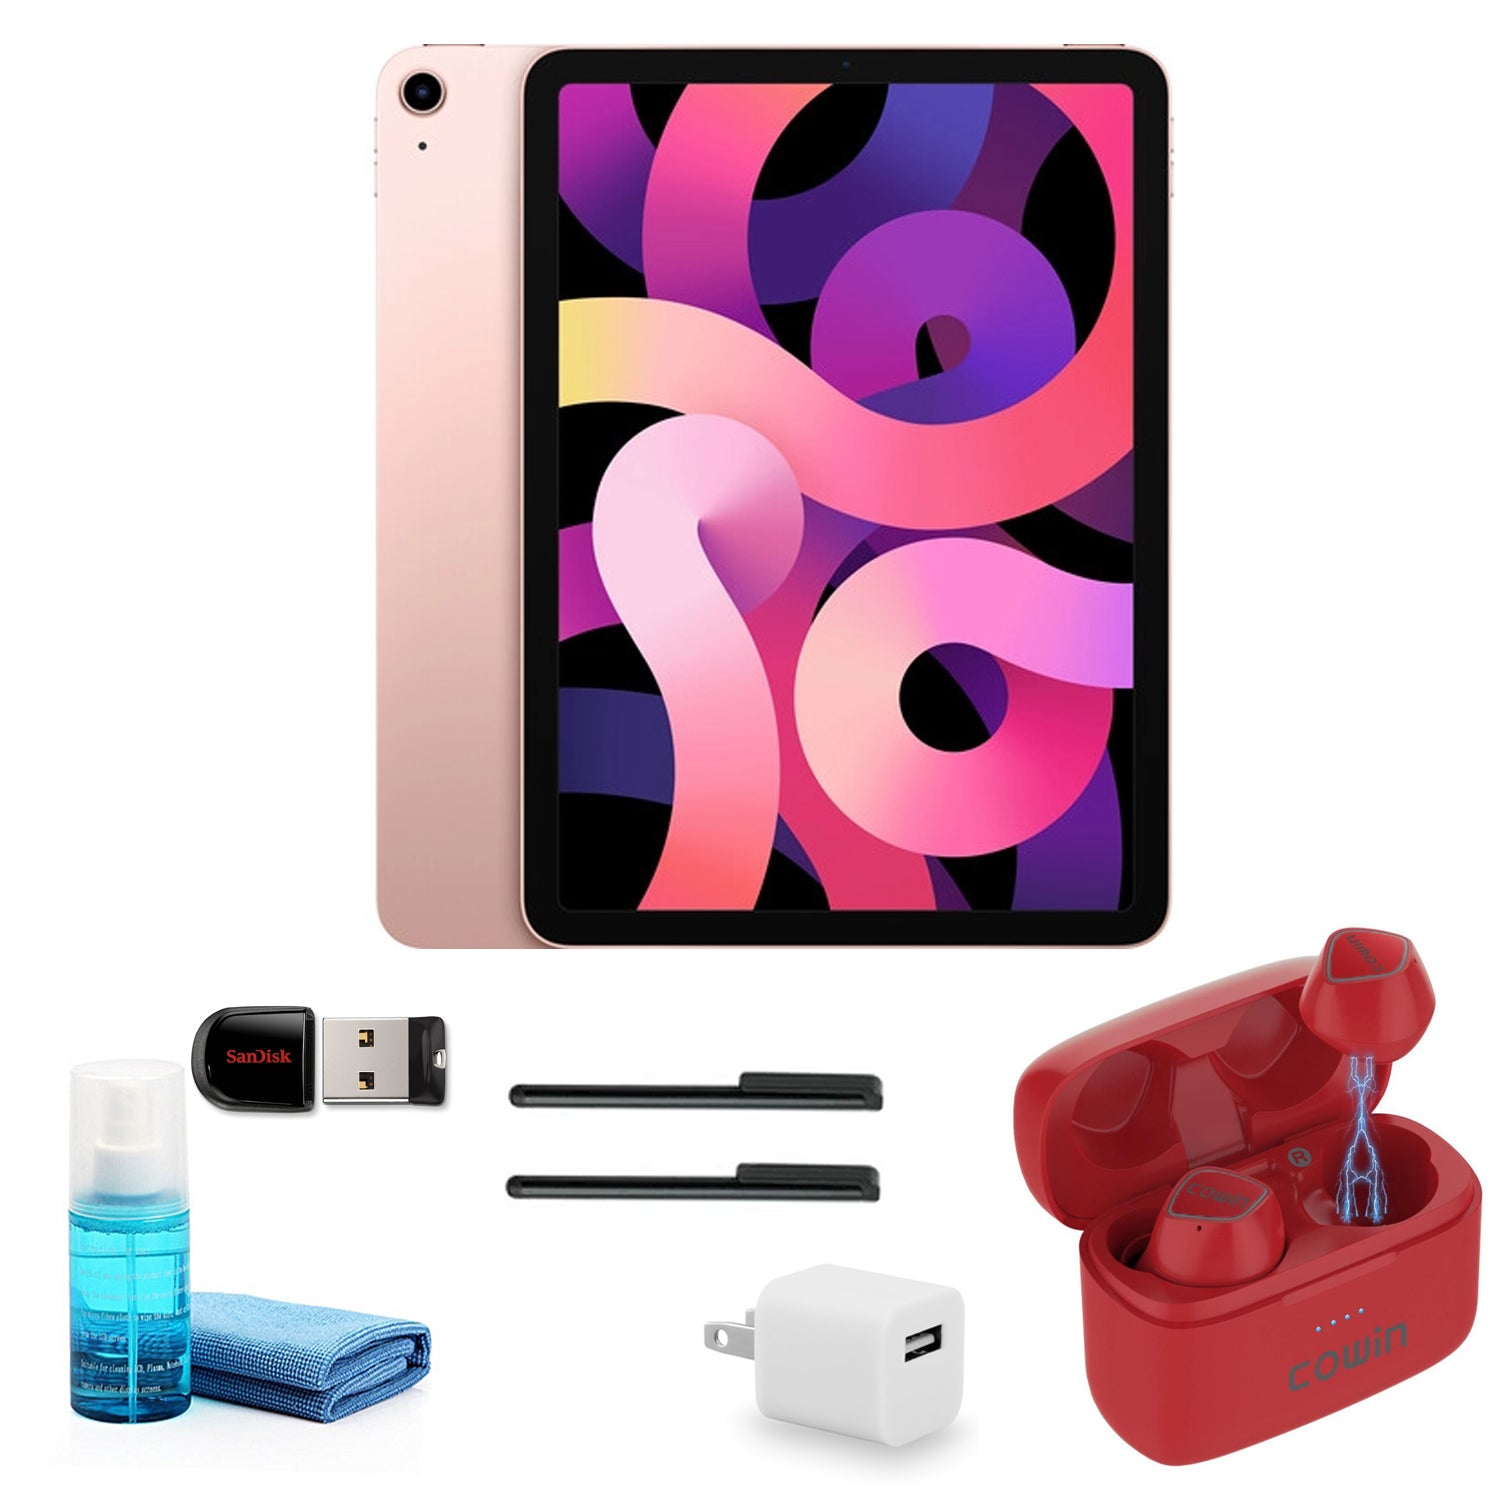 Apple iPad Air 10.9 Inch (64GB, Rose Gold) with Red Wireless Earbuds and more